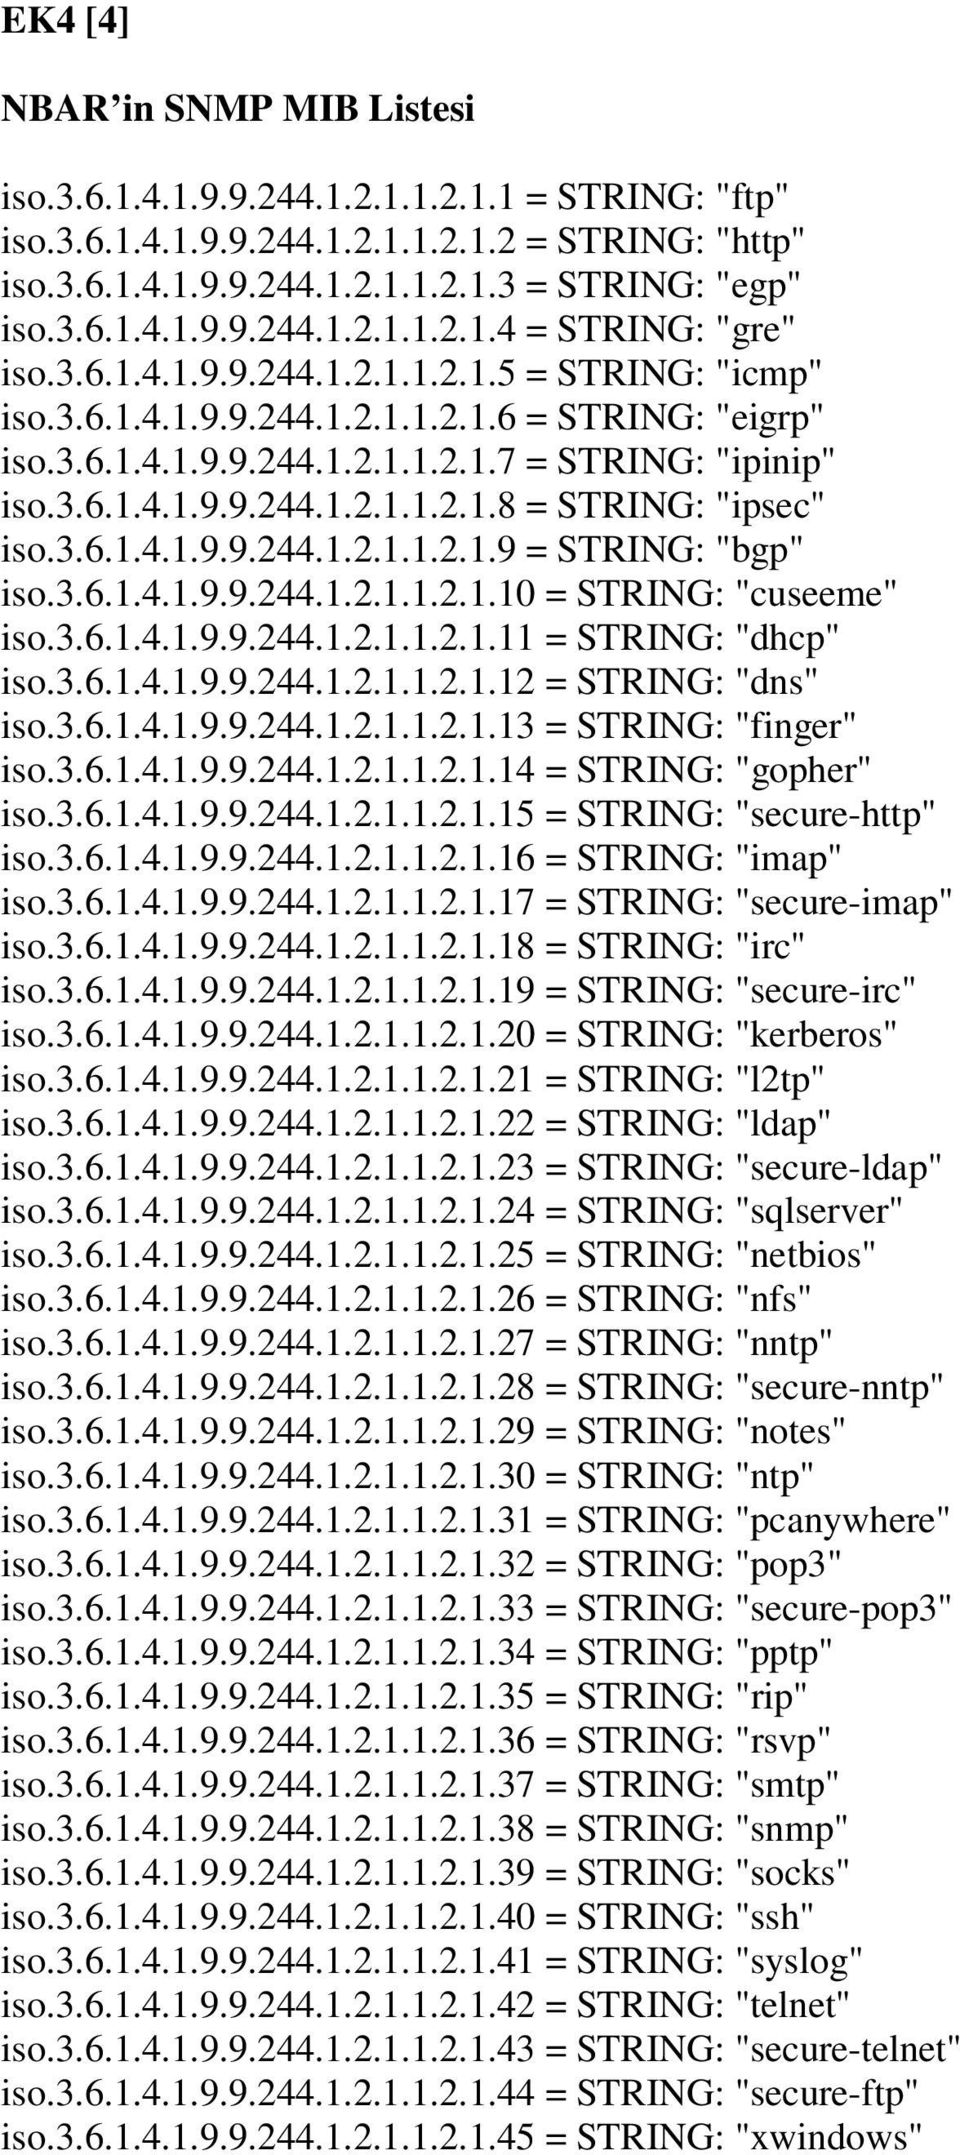 3.6.1.4.1.9.9.244.1.2.1.1.2.1.9 = STRING: "bgp" iso.3.6.1.4.1.9.9.244.1.2.1.1.2.1.10 = STRING: "cuseeme" iso.3.6.1.4.1.9.9.244.1.2.1.1.2.1.11 = STRING: "dhcp" iso.3.6.1.4.1.9.9.244.1.2.1.1.2.1.12 = STRING: "dns" iso.